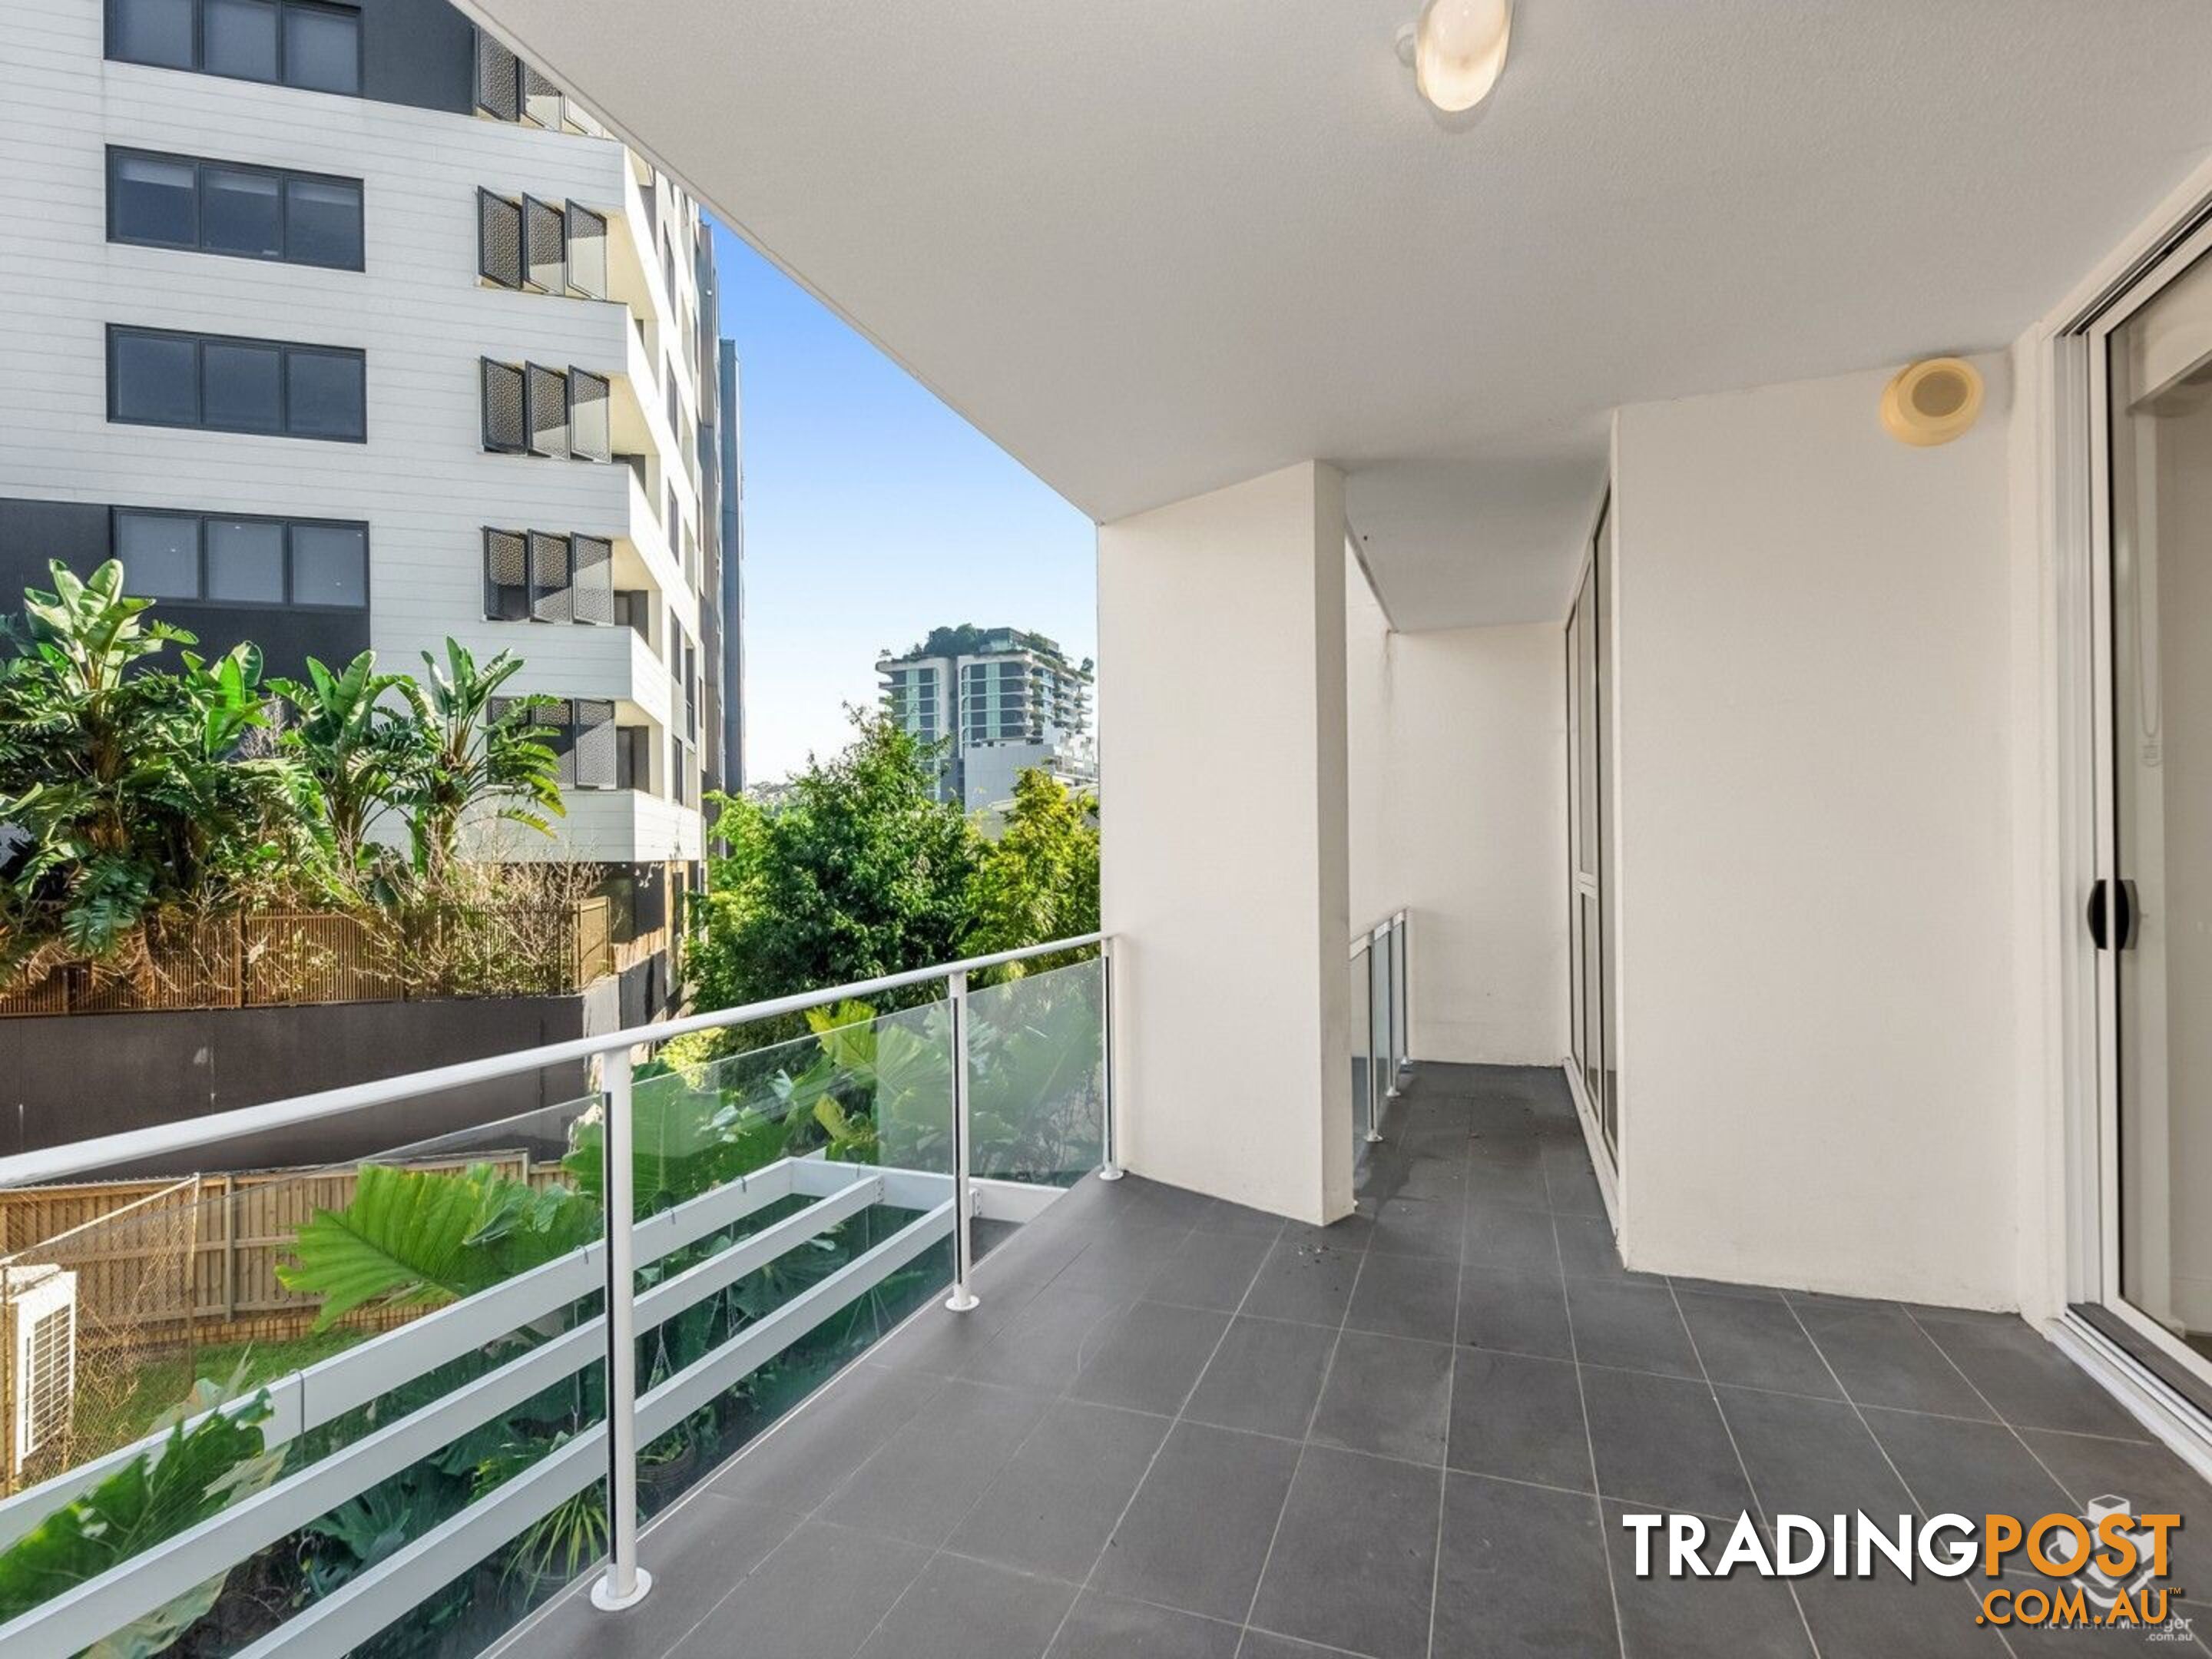 206/8 Bank Street West End QLD 4101